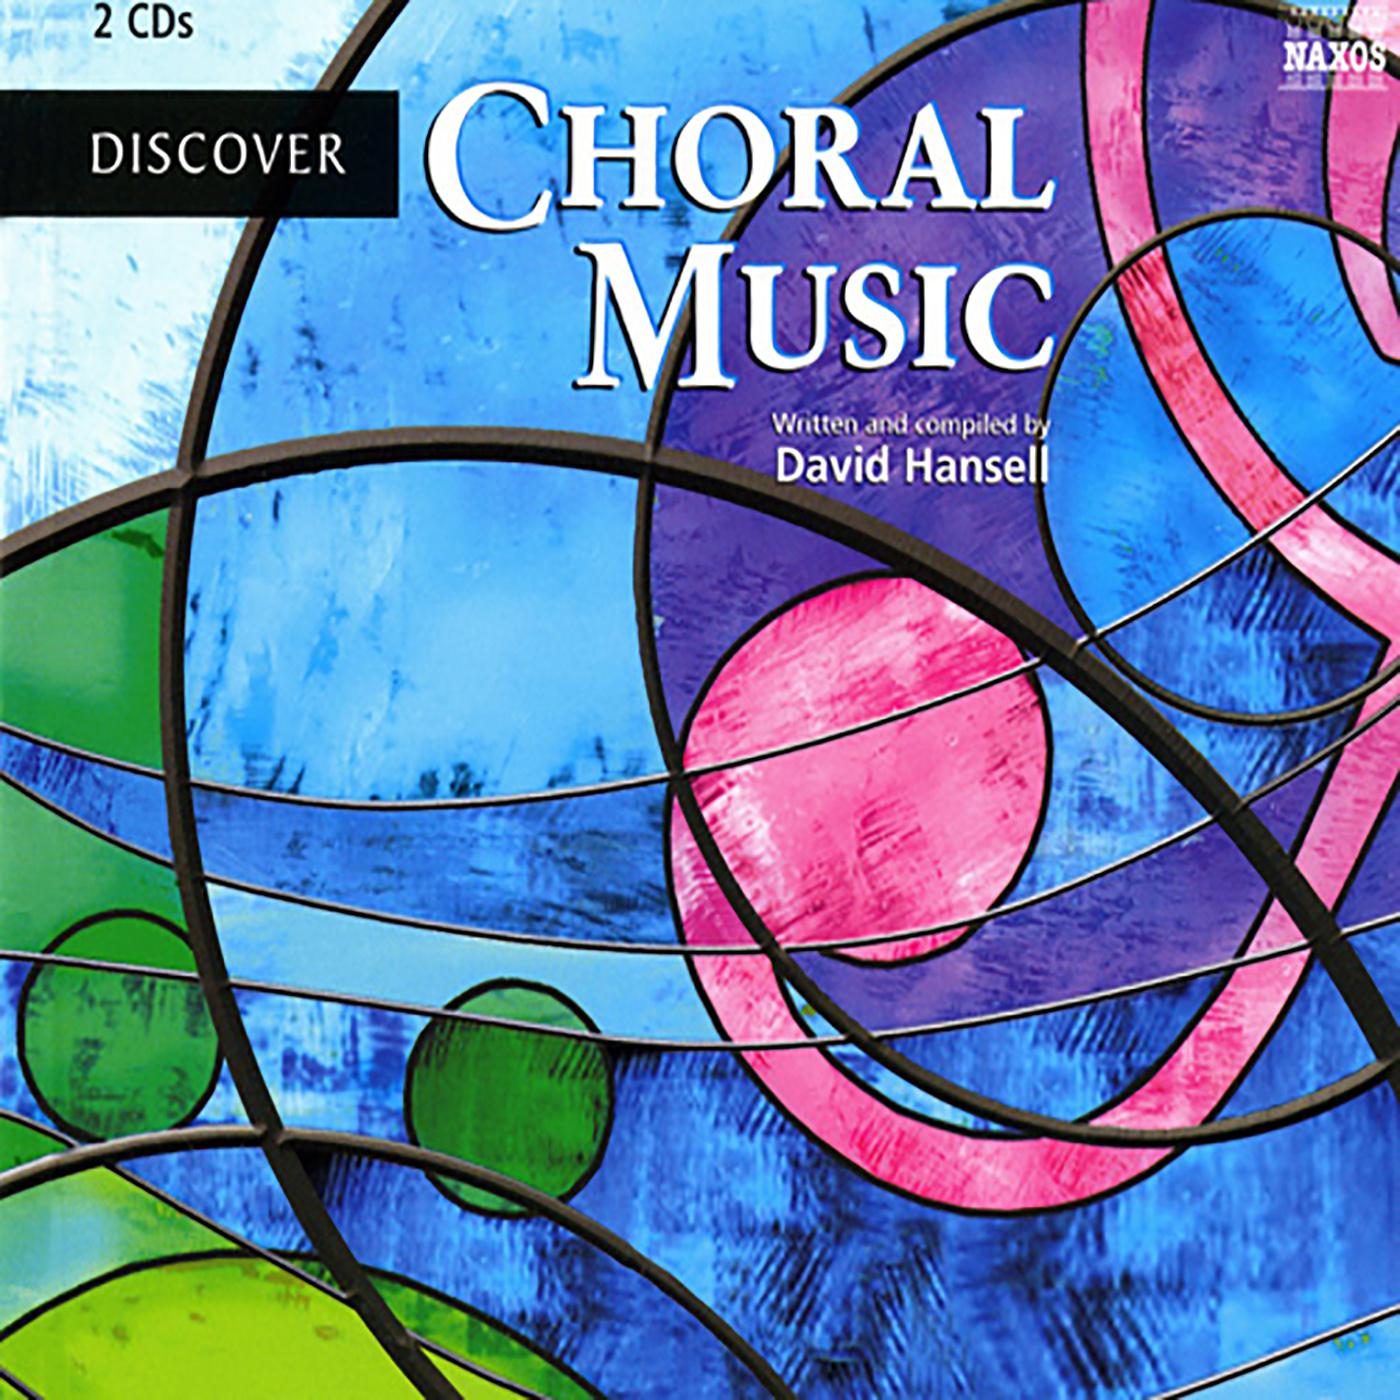 DISCOVER CHORAL MUSIC